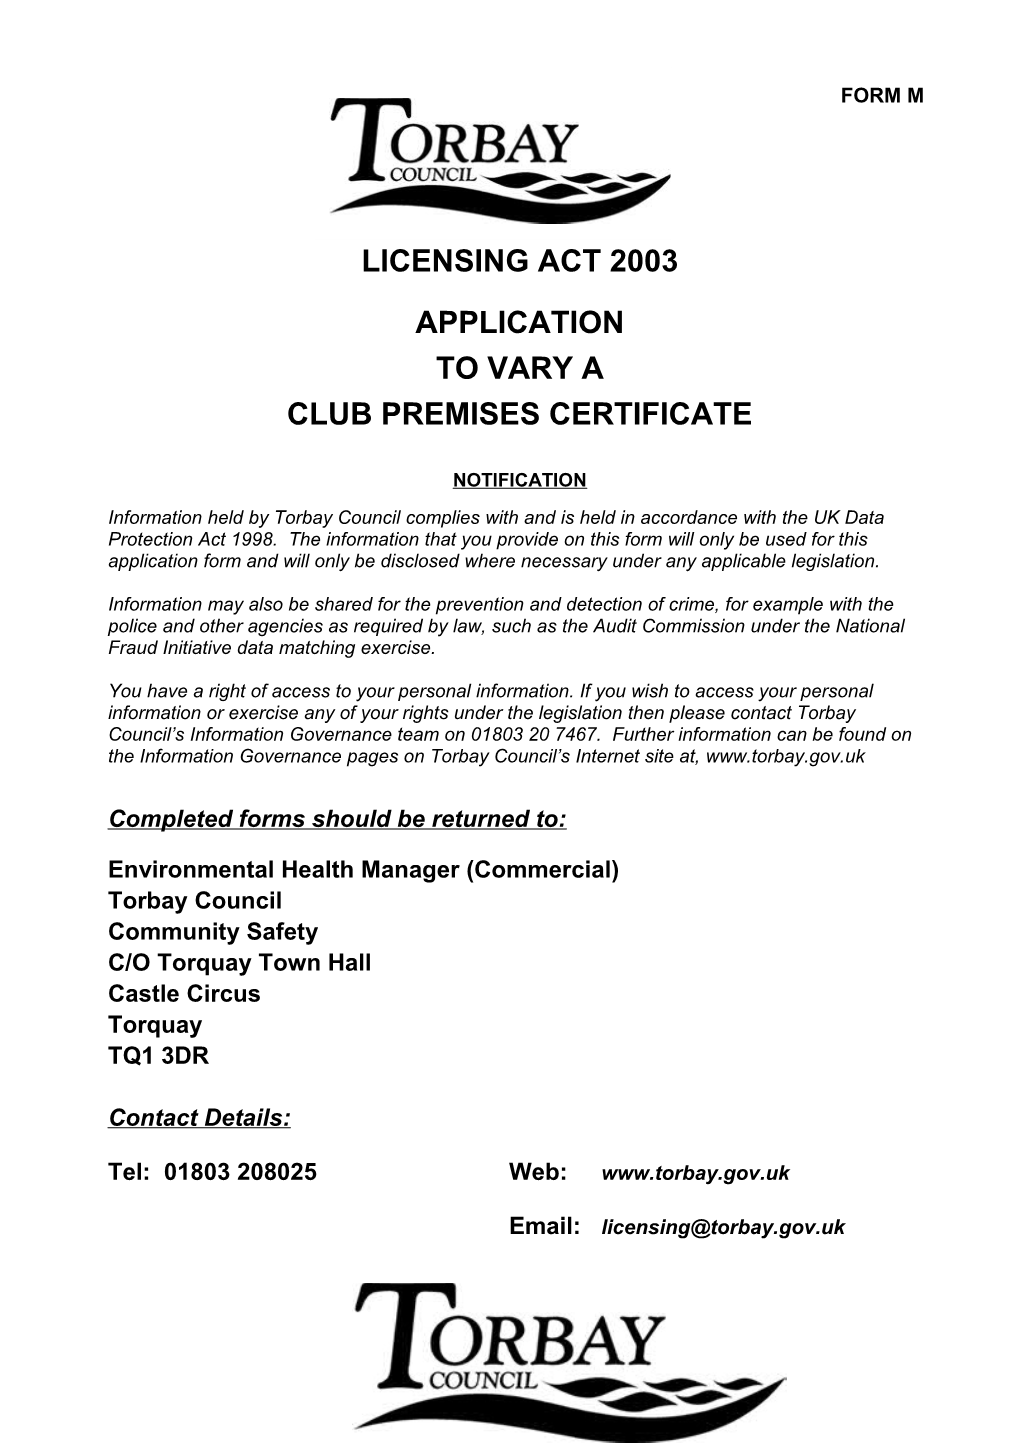 Under the Licensing Act 2003